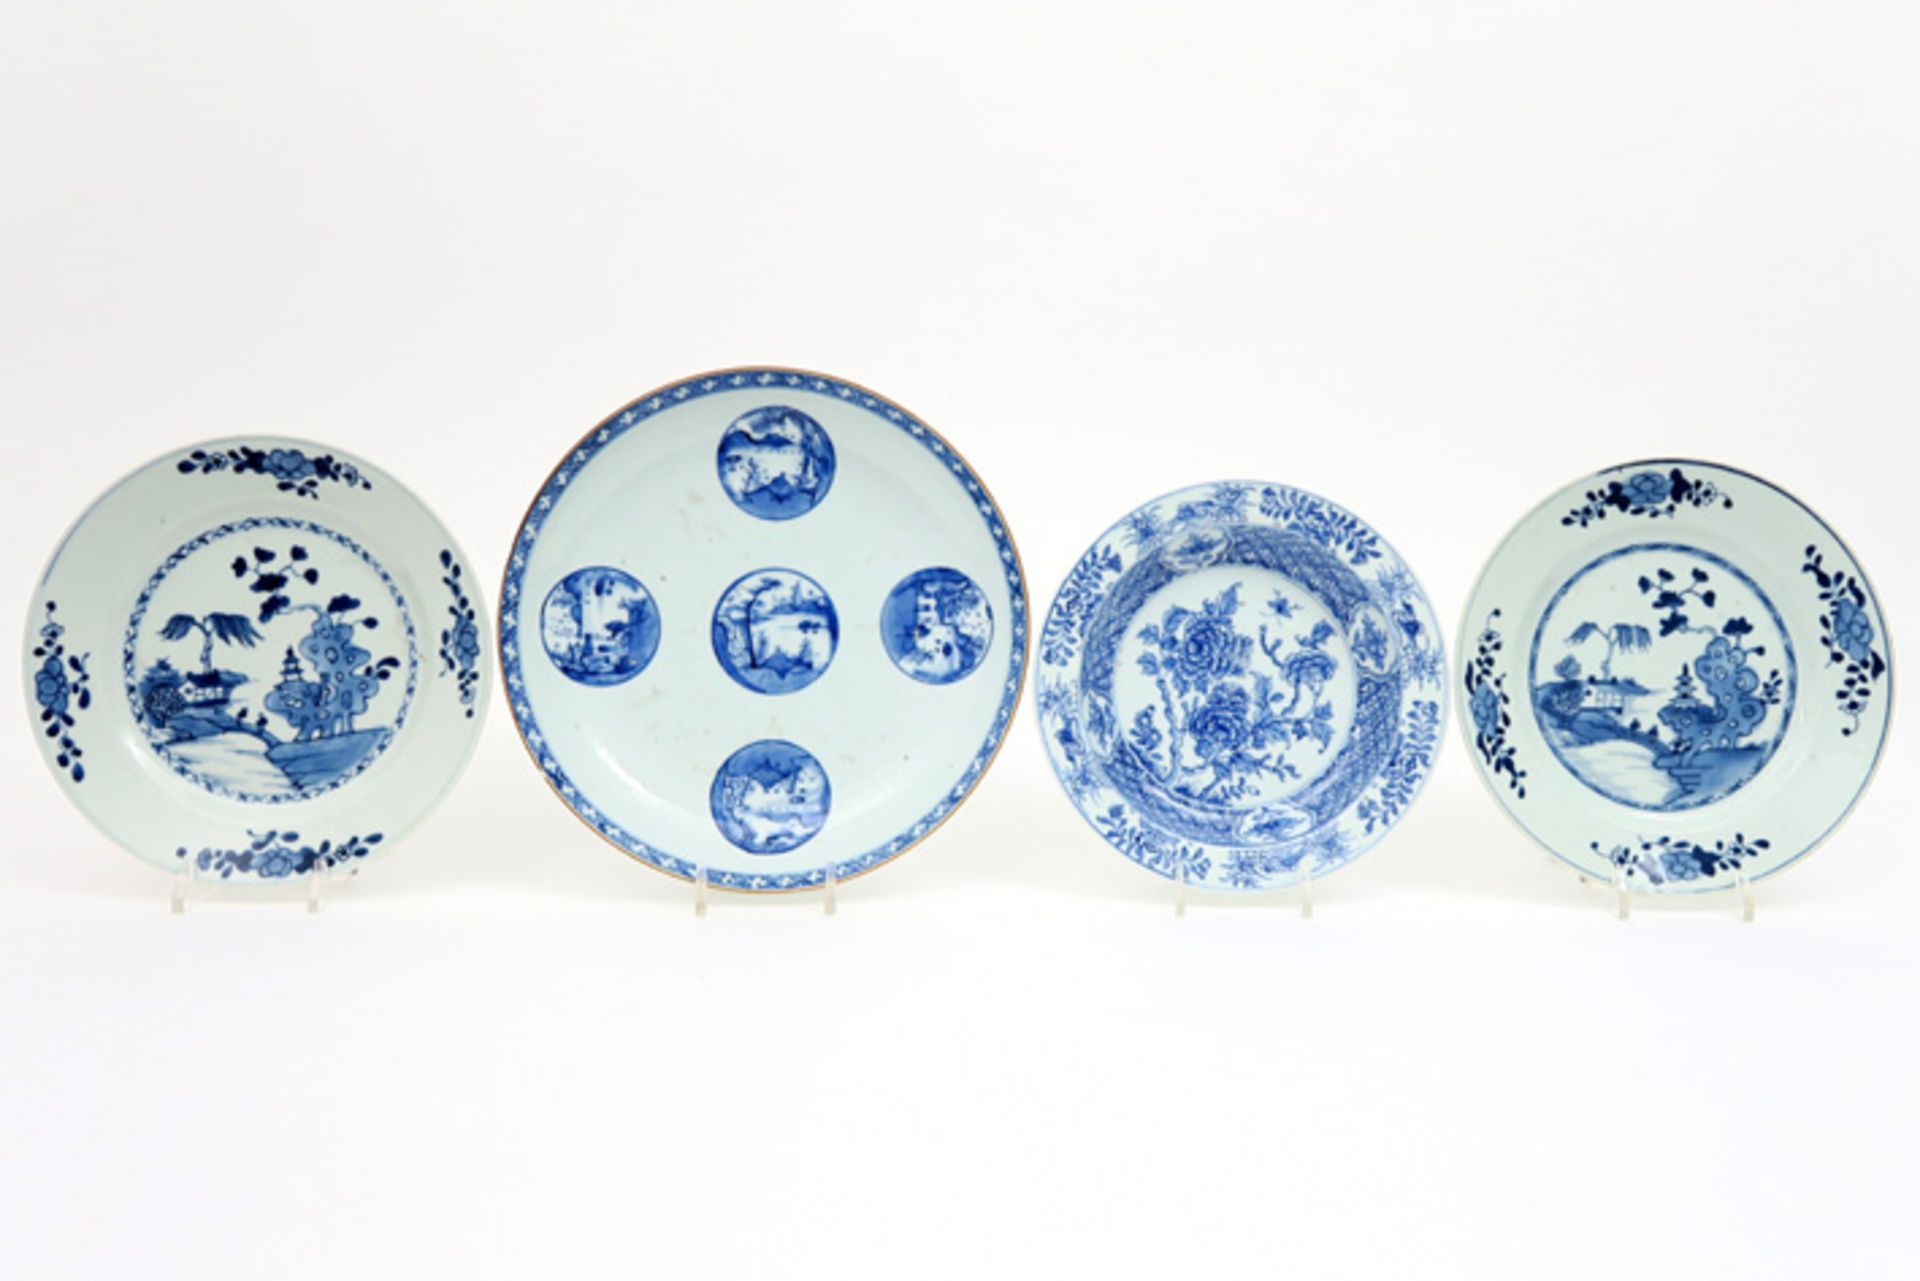 four 18th Cent. Chinese plates in porcelain with blue-white decor Lot van vier achttiende eeuwse